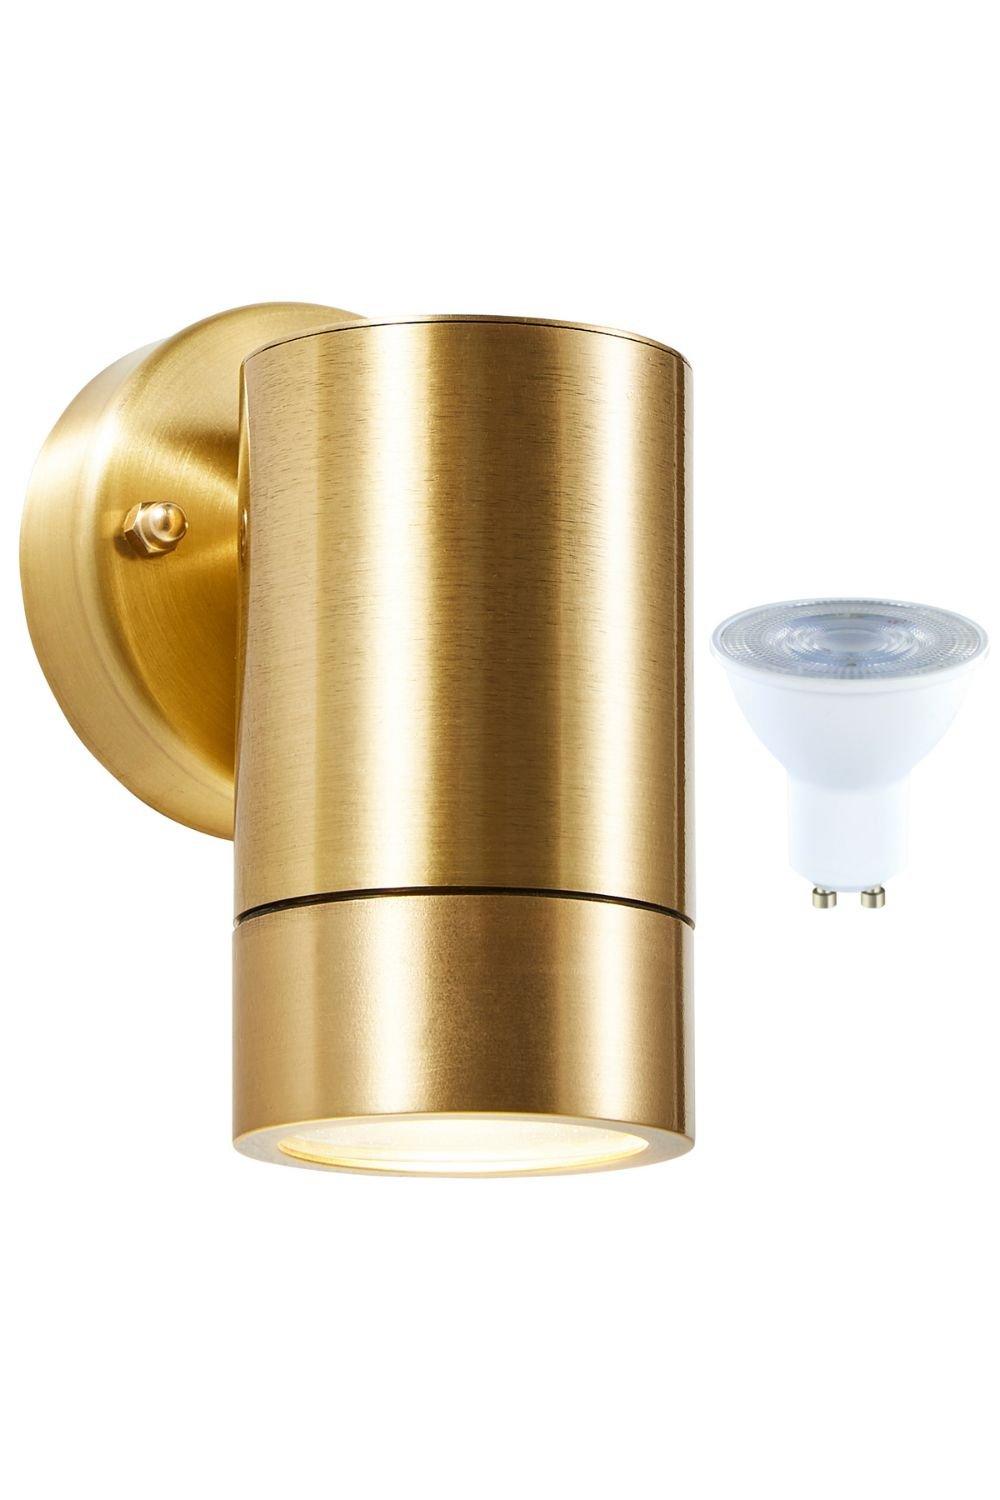 Wall Mounted Downlight with LED GU10 Bulbs Included: Solid Brass